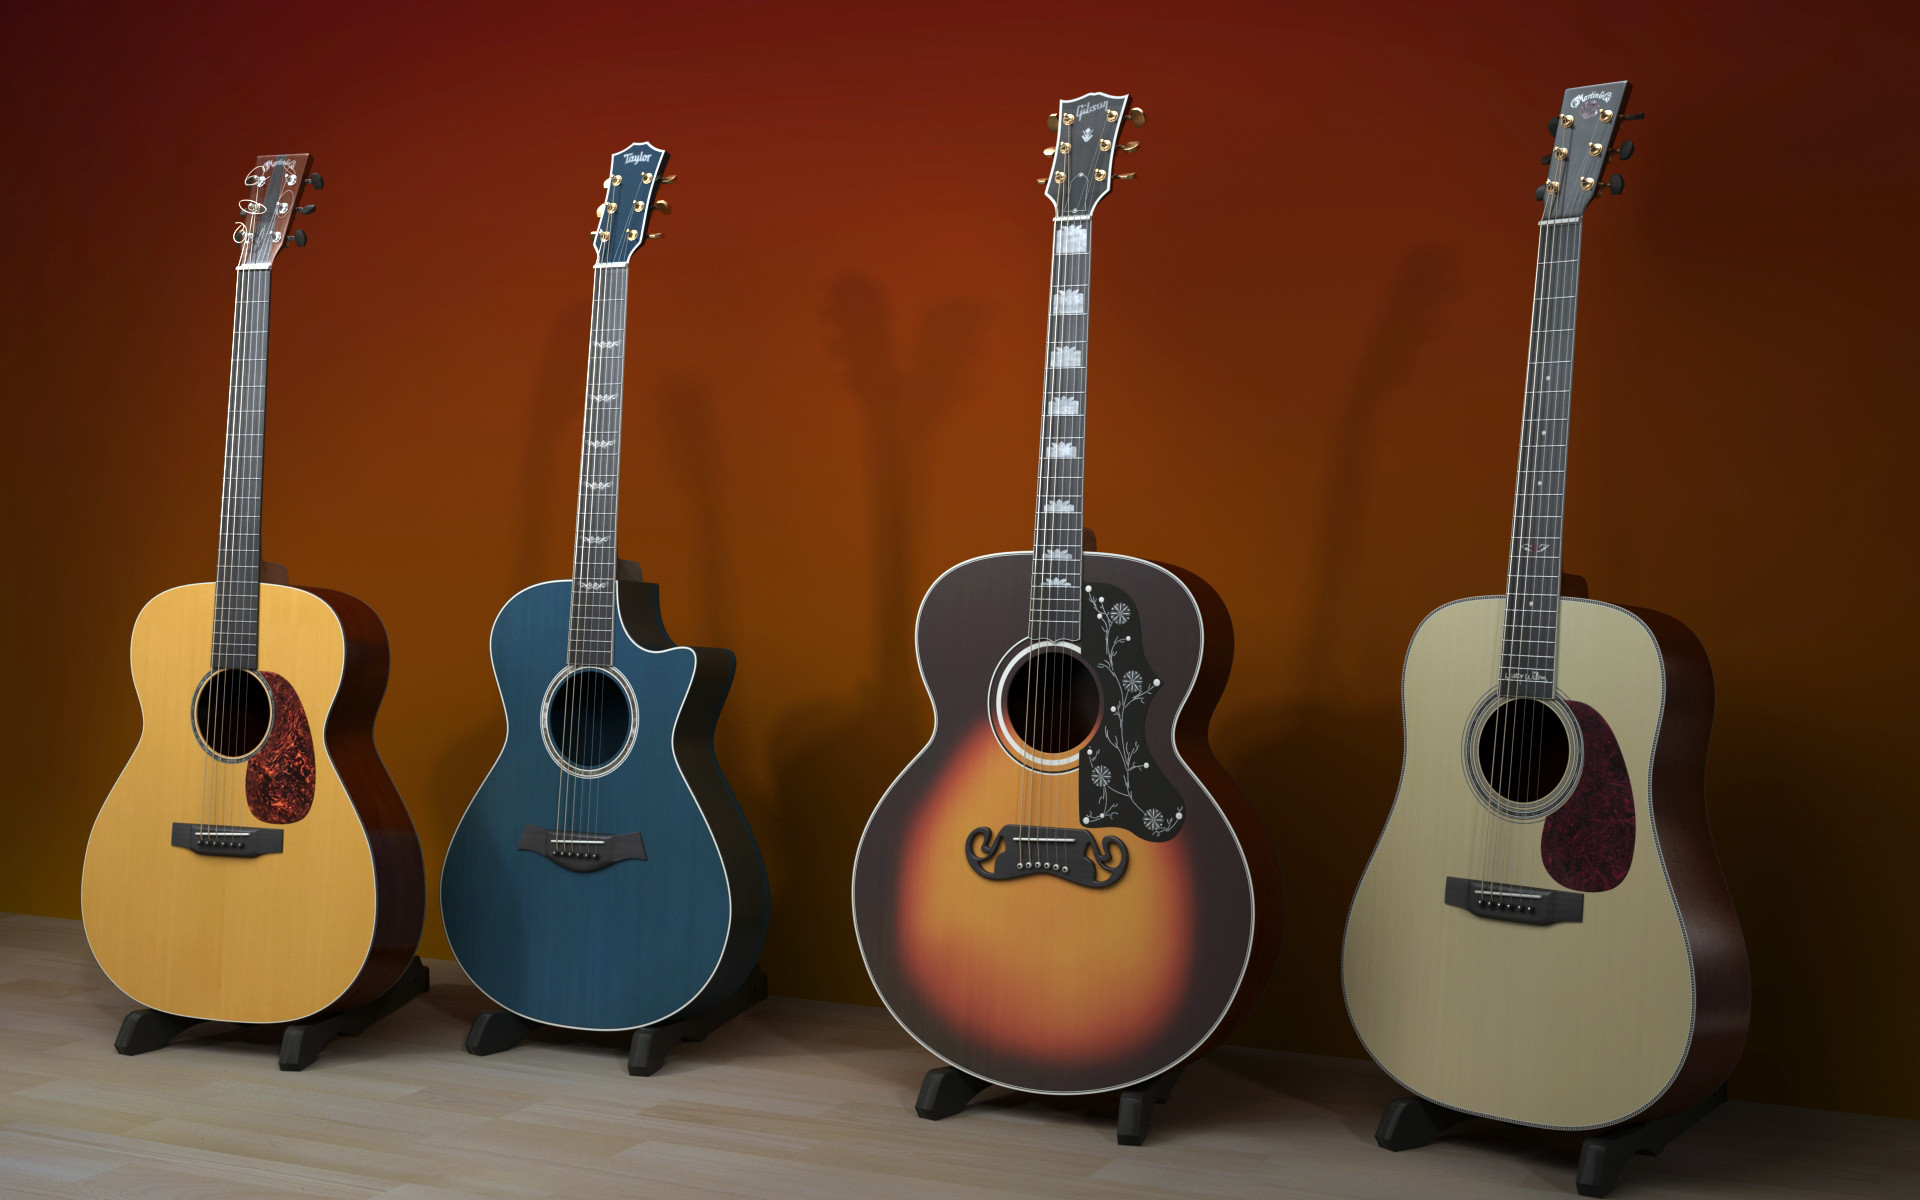 1920x1200 Guitar wallpapers. Guitar High quality wallpapers